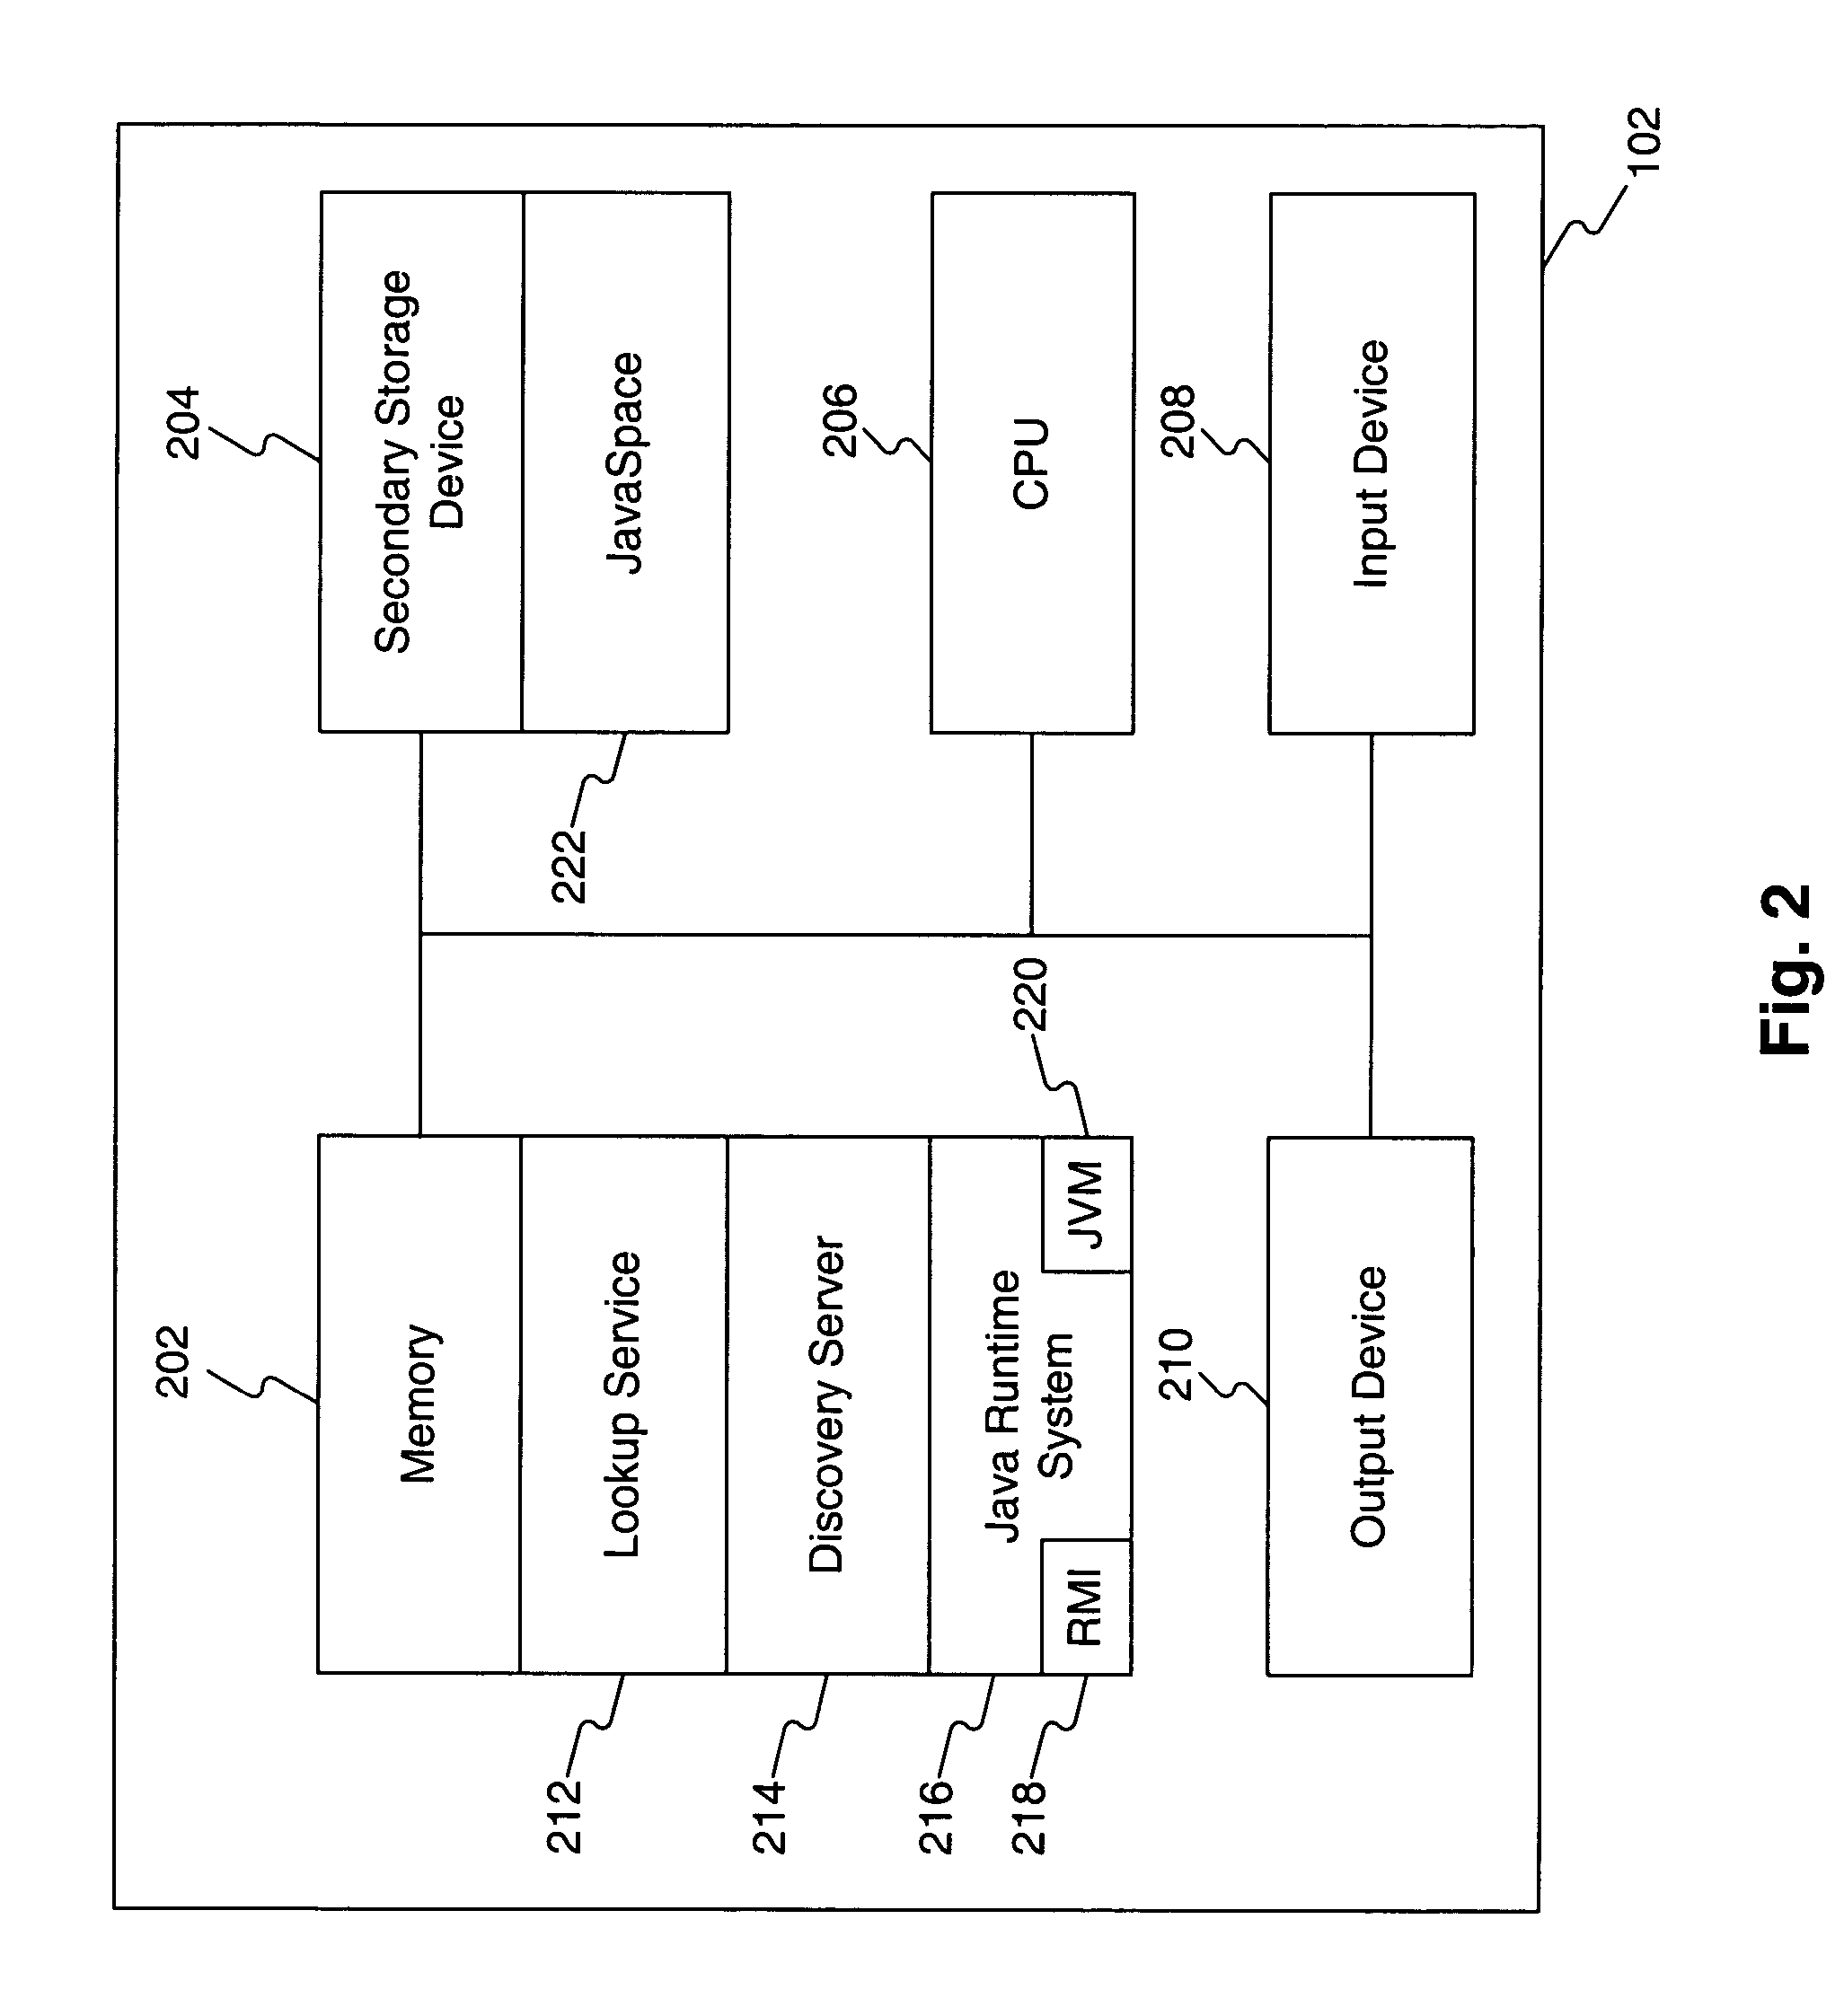 Systems and methods for providing dynamic quality of service for a distributed system